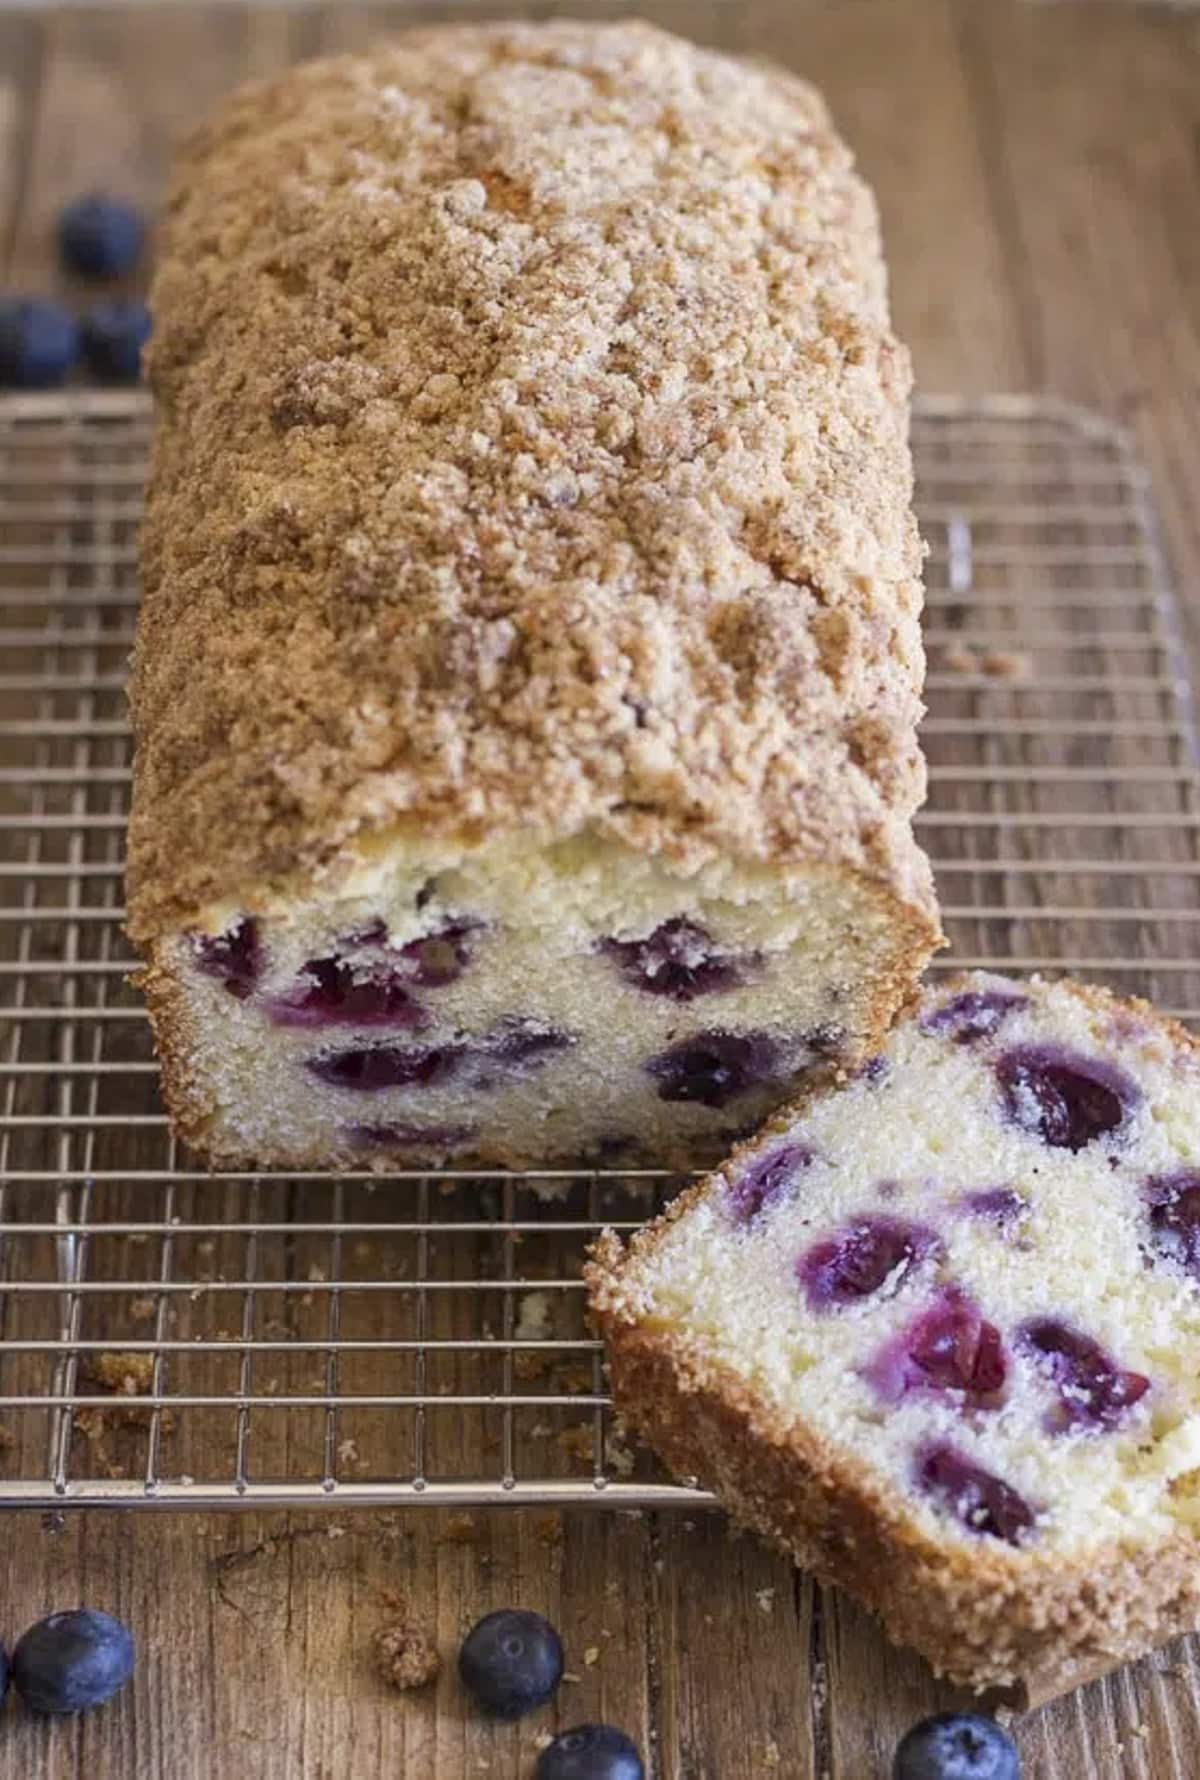 Streusel Topped Blueberry Bread